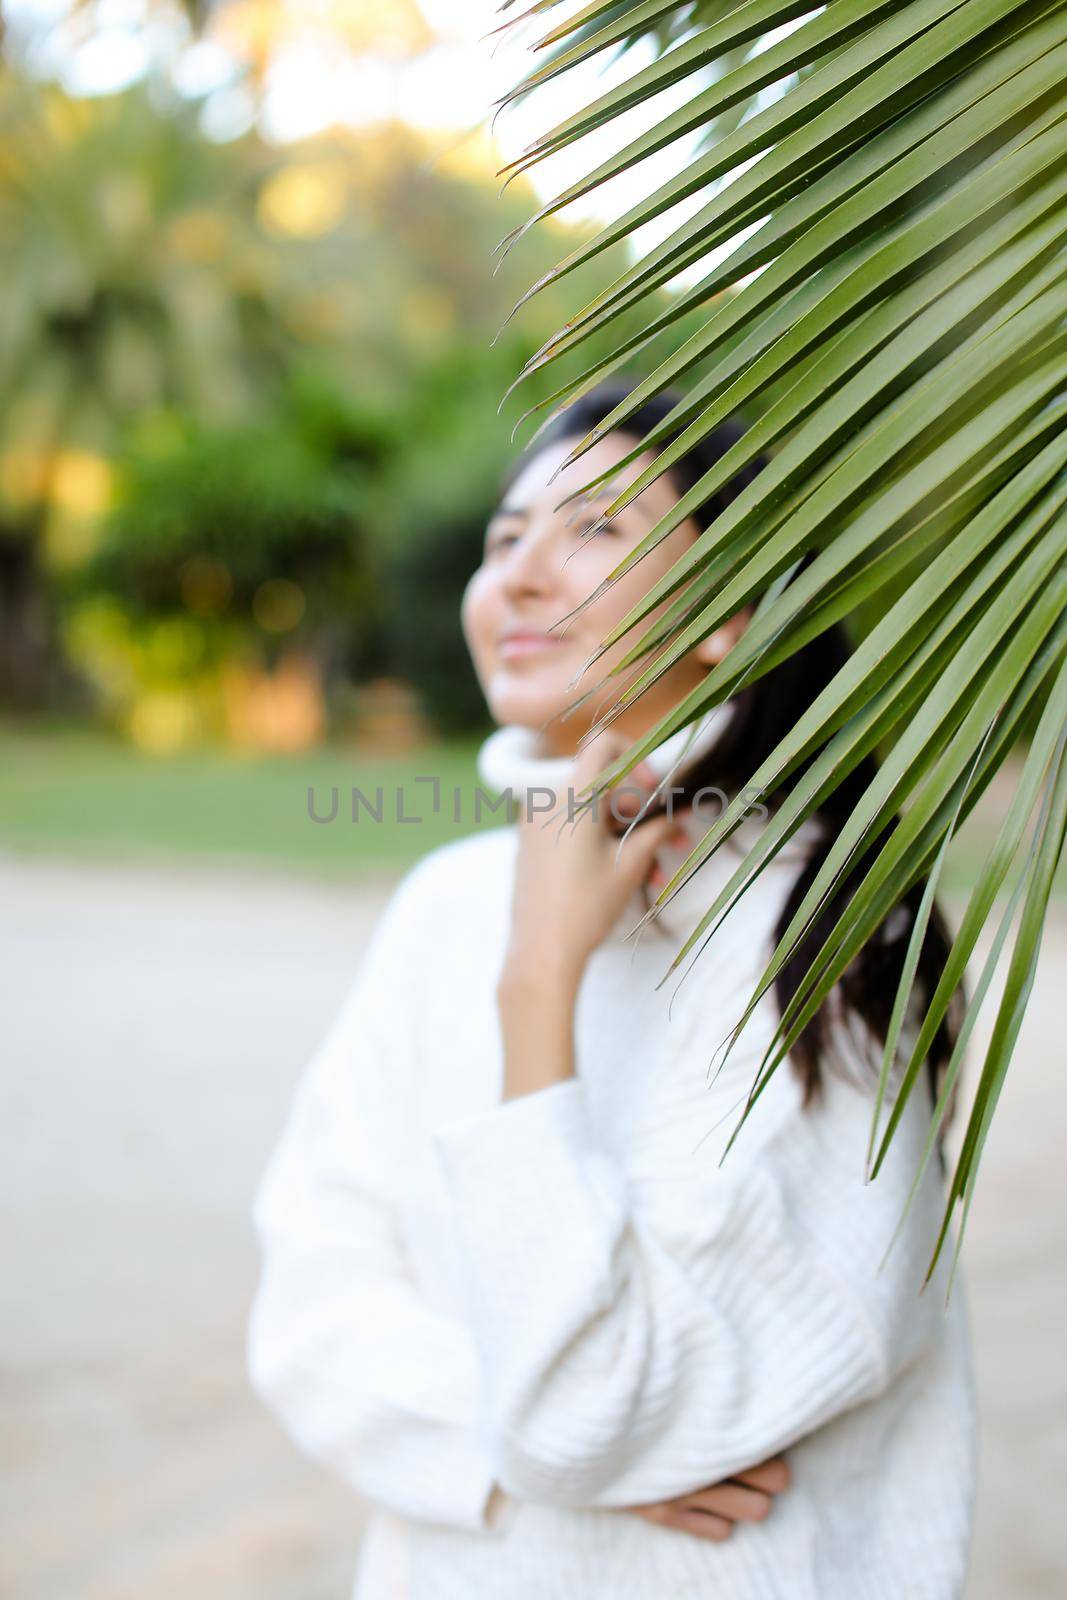 Focus on palm leaf, chinese girl wearing white sweater standing on beach. by sisterspro